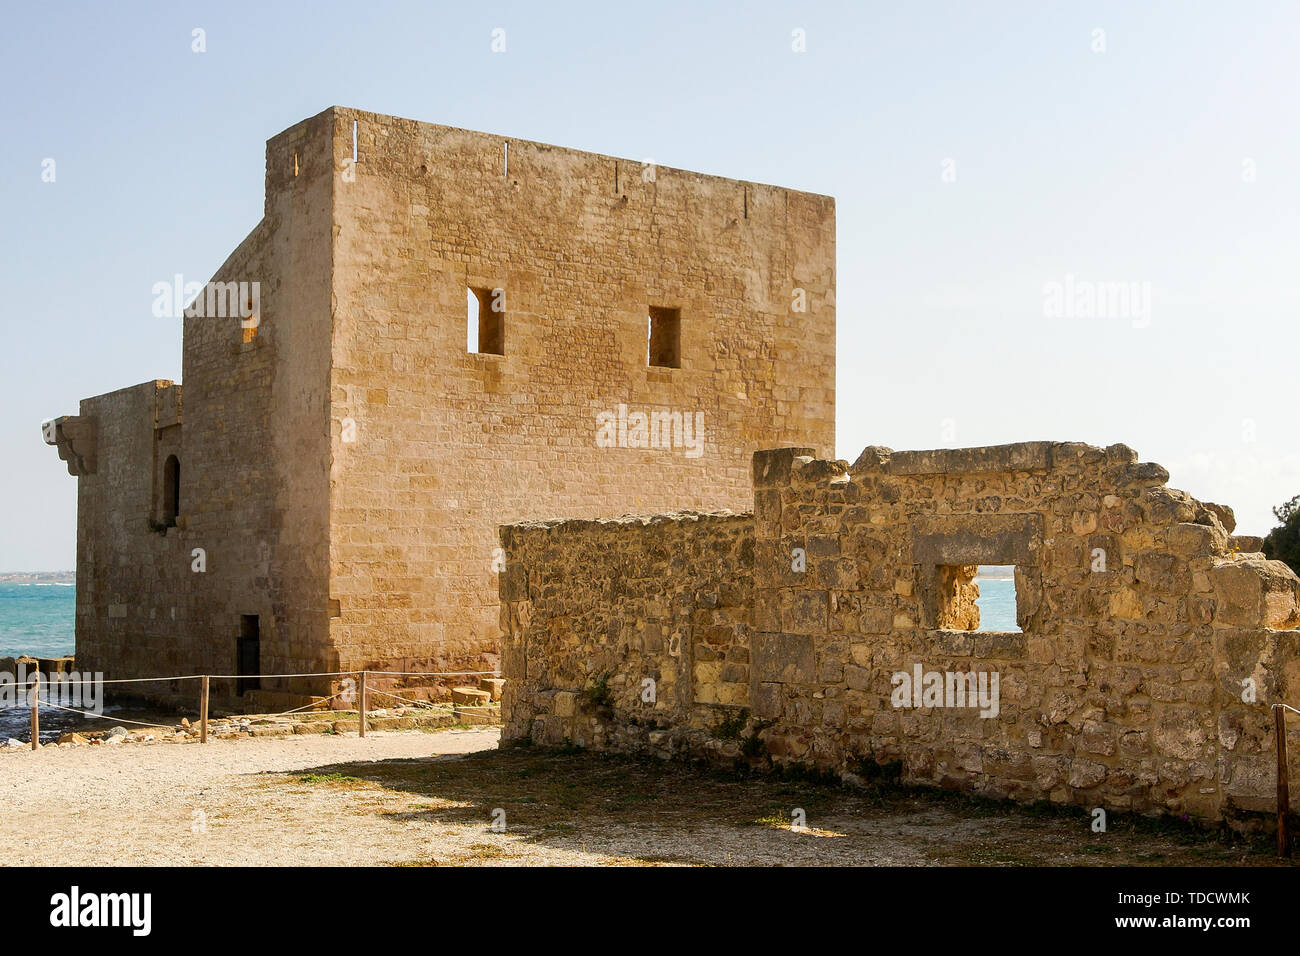 Sights of The Sveva Tower of Vendicari Nature Reserve in Sicily, Italy. Stock Photo